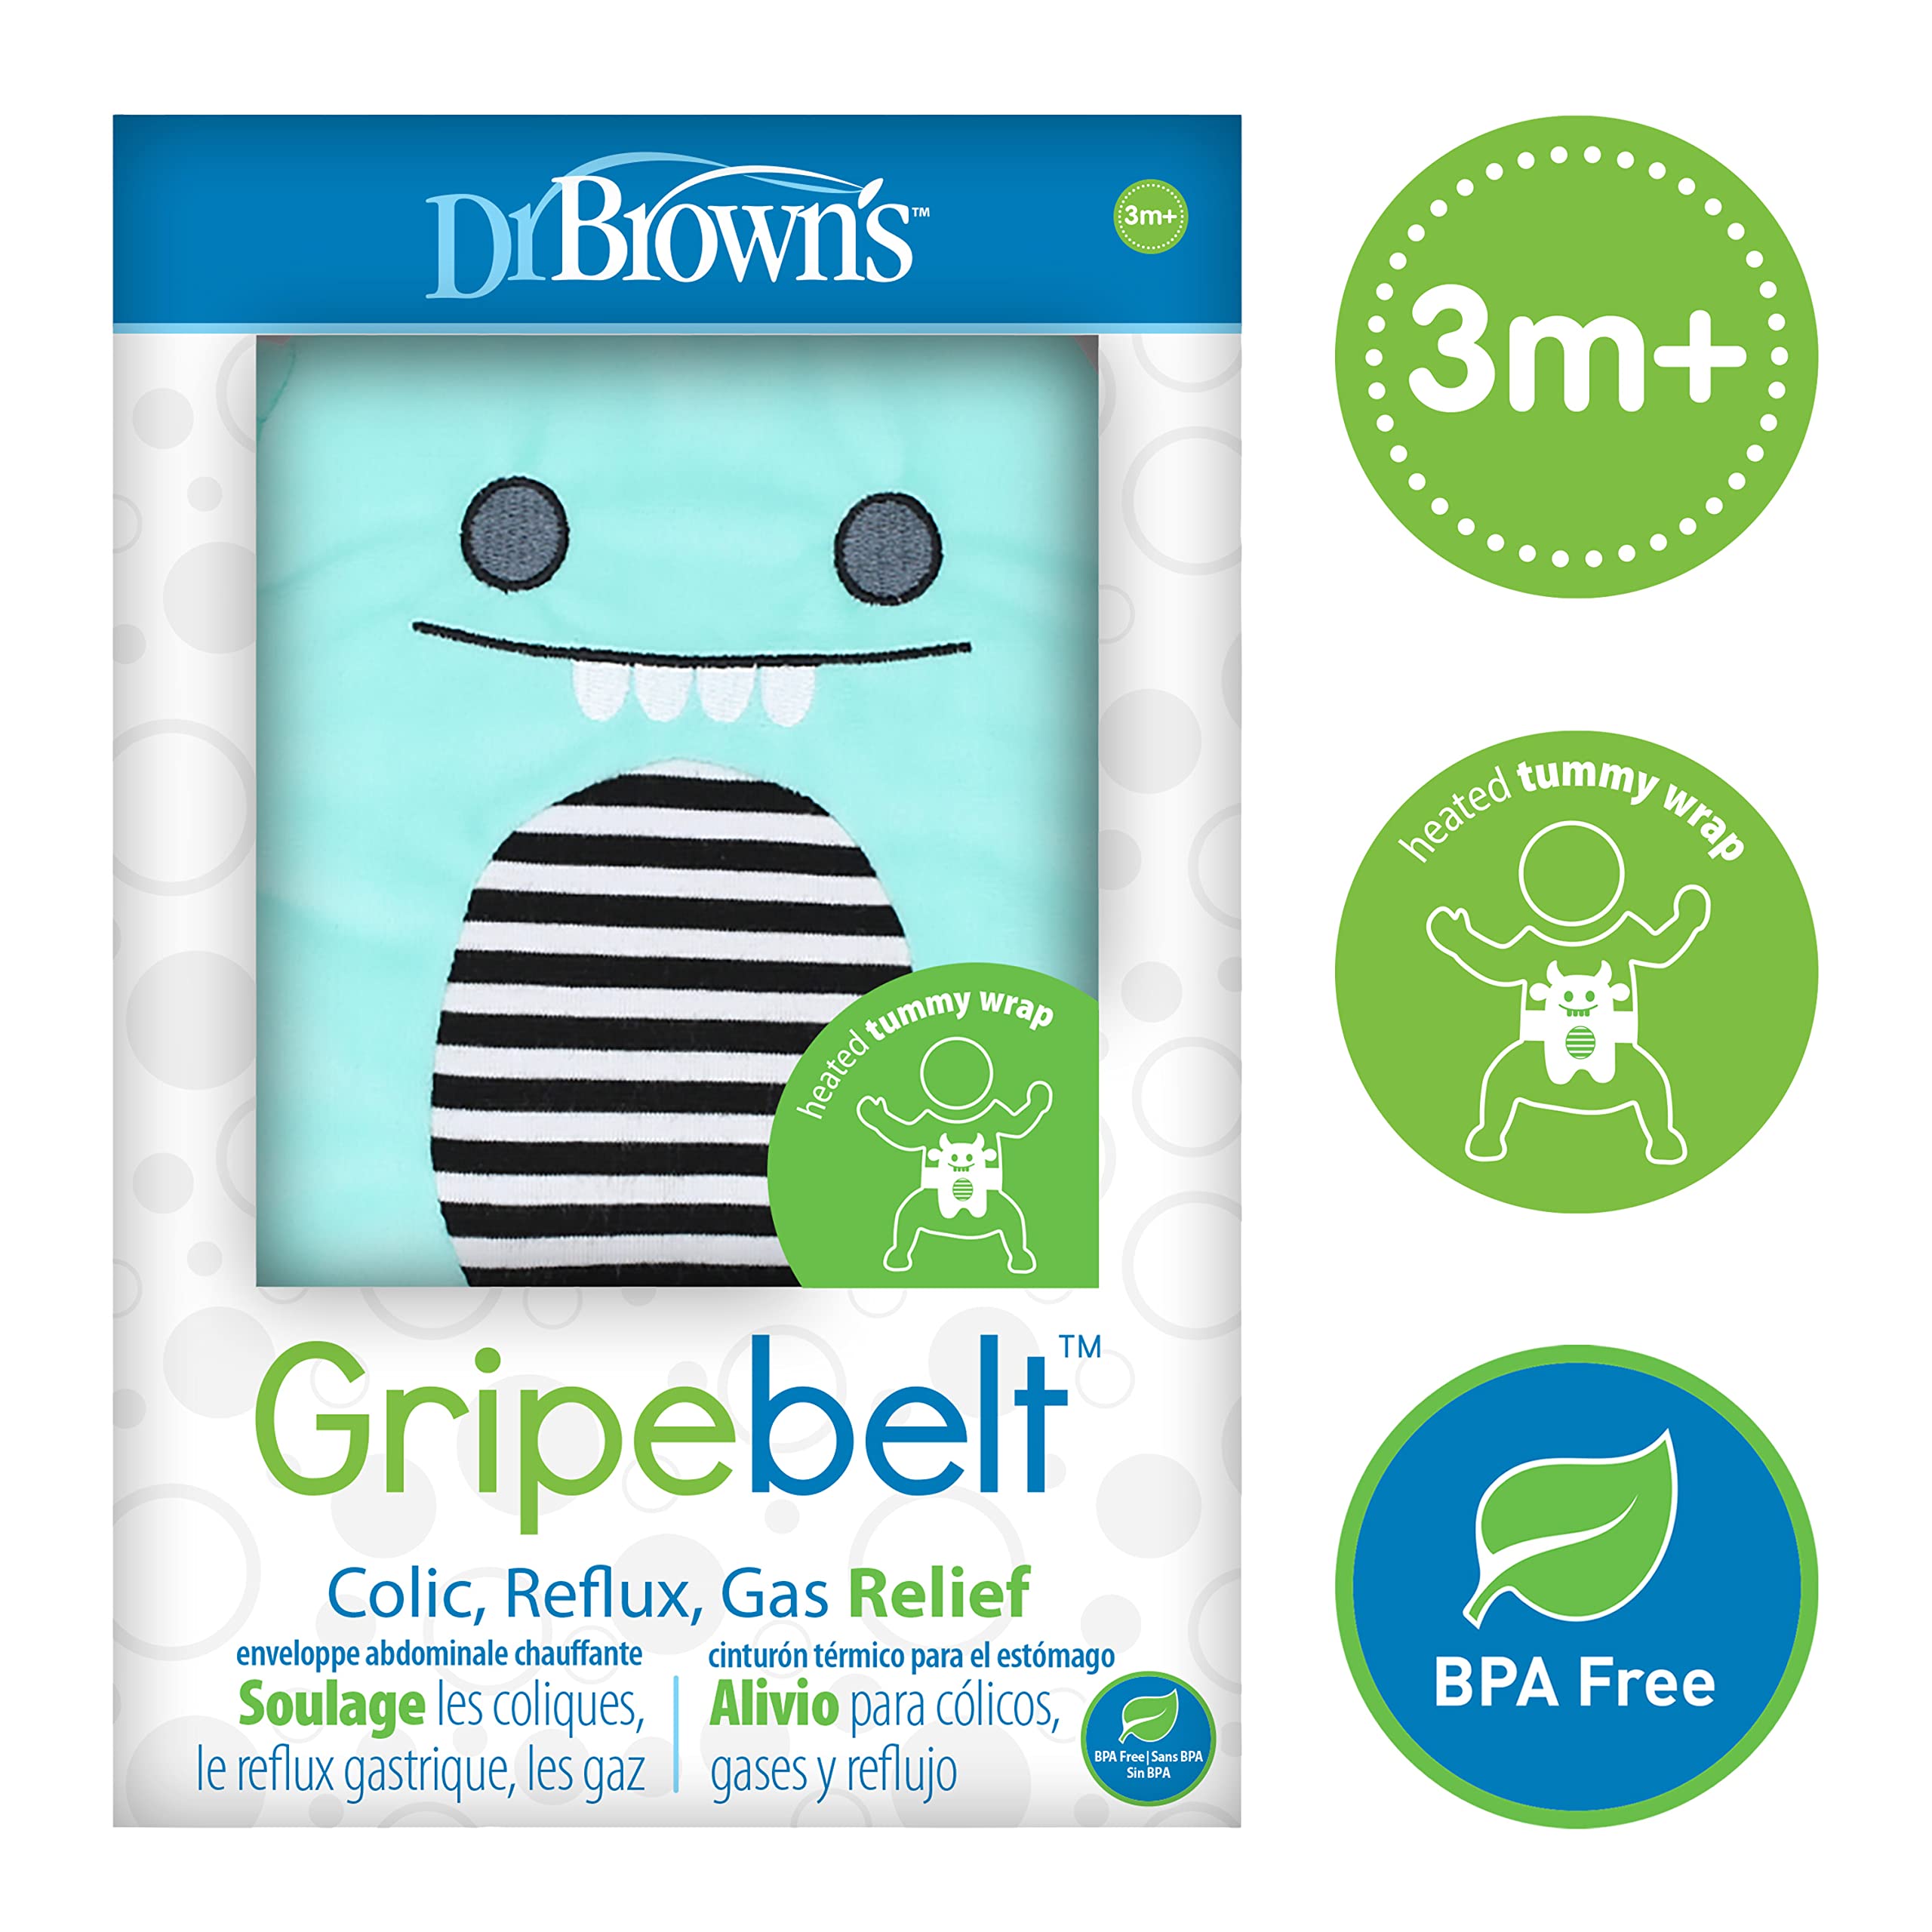 Dr. Brown’s Gripebelt for Colic Relief, Heated Tummy Wrap, Baby Swaddling Belt for Gas Relief, Natural Relief for Upset Stomach in Babies and Toddlers, Blue Monster, 3m+